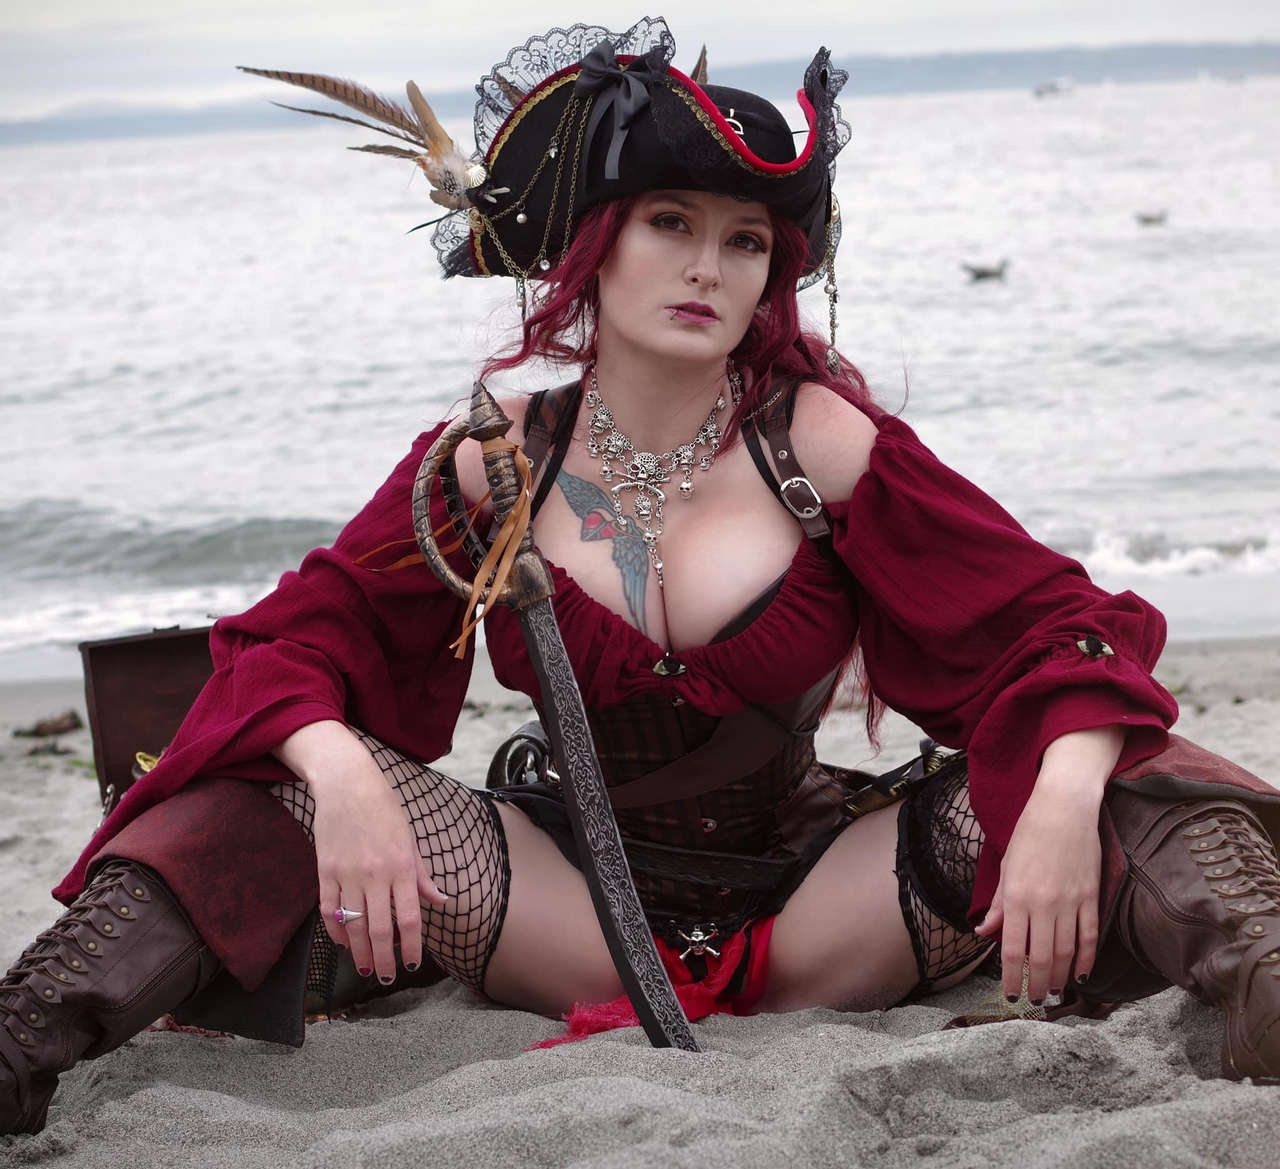 Original Pirate Character By Captive Cosplay Any Name Suggestion